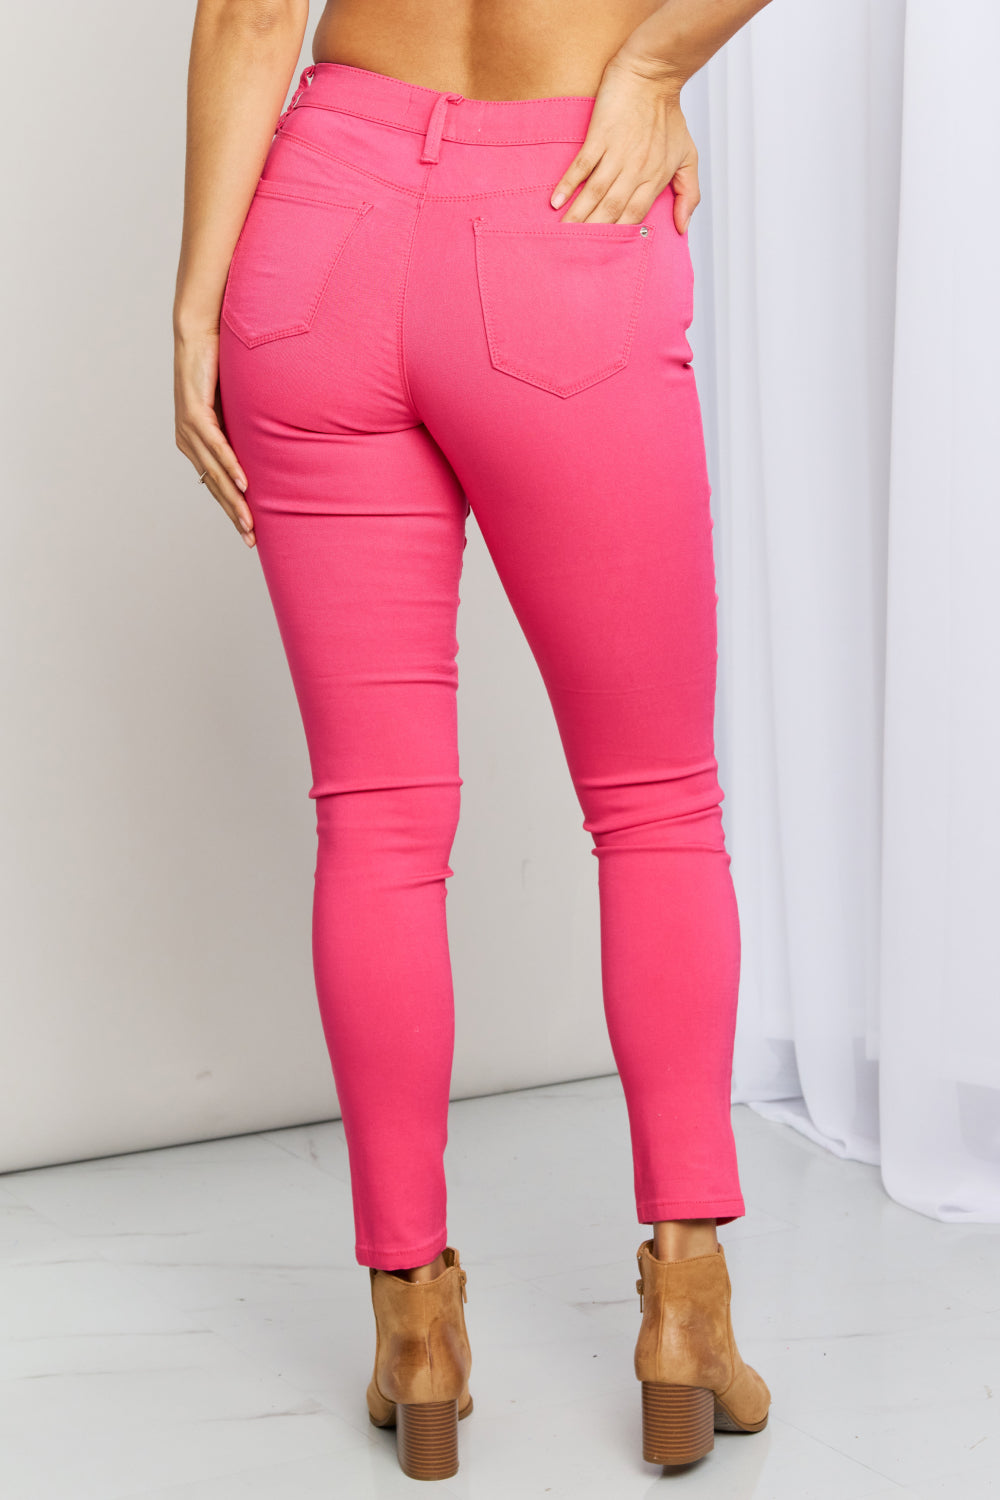 Kate Hyper-Stretch Mid-Rise Skinny Jeans in Fiery Coral